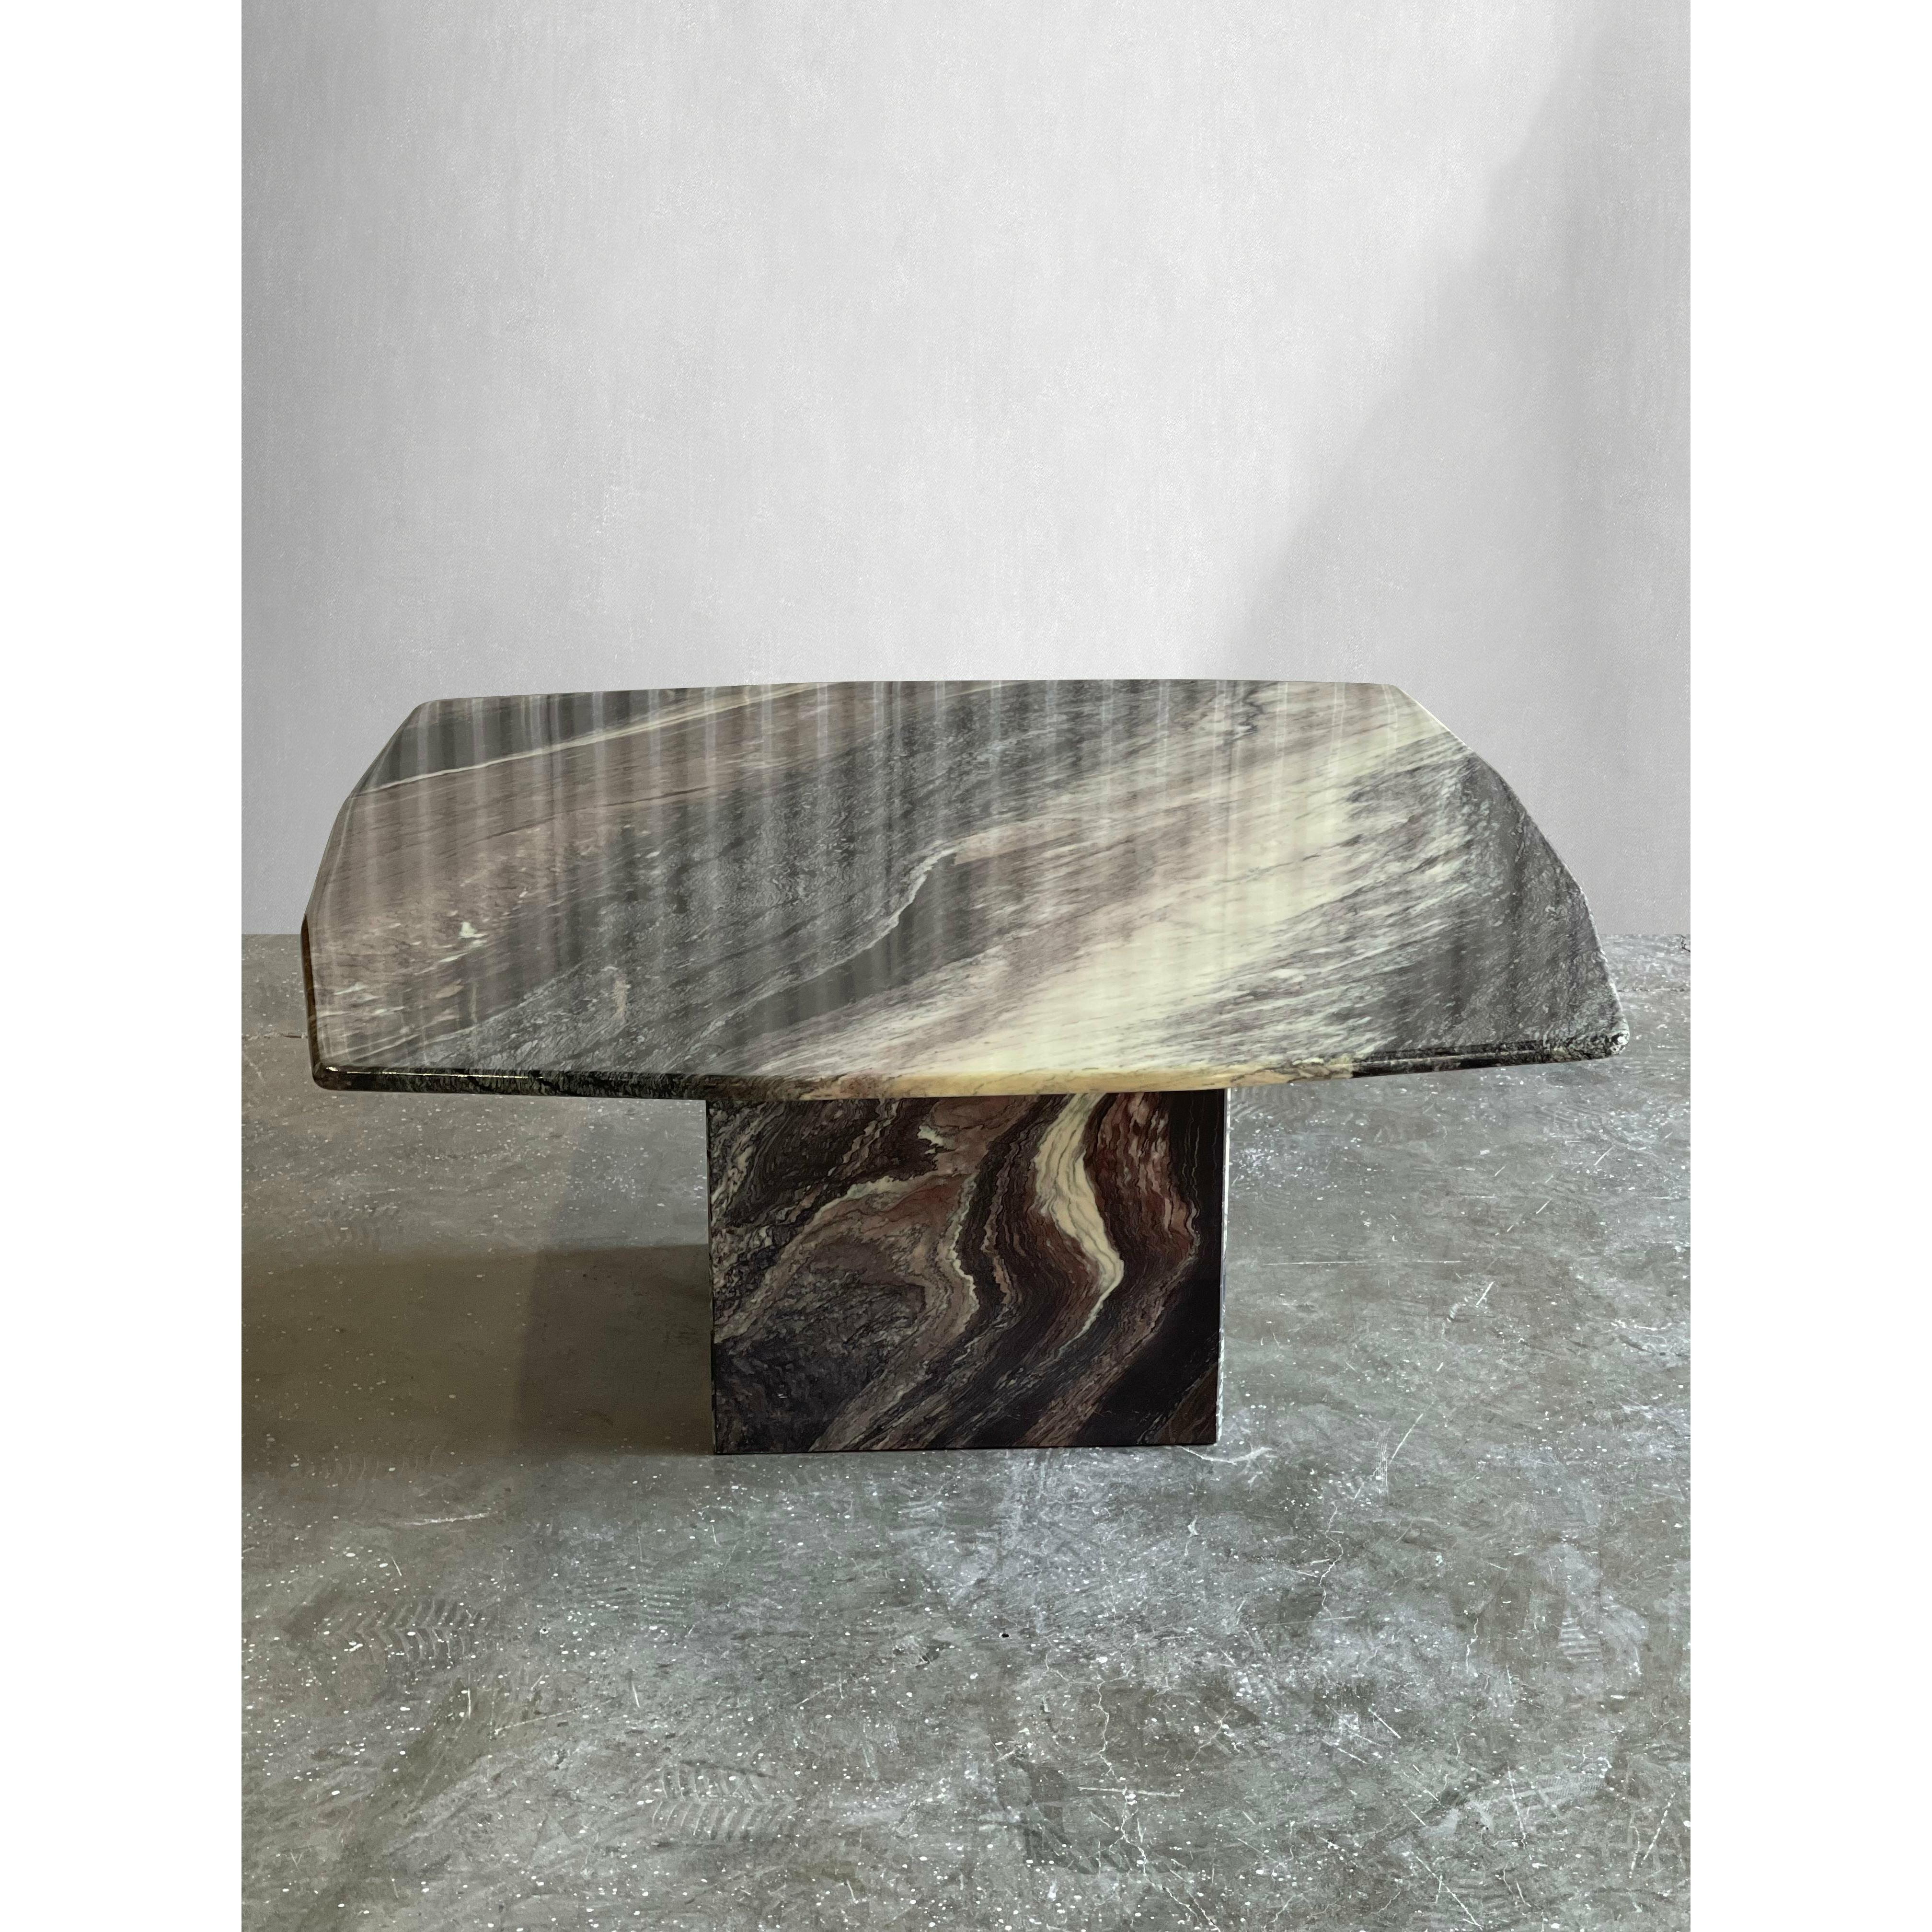 Stunning coffee table in Cipollino Ondulato Marble. This marble is mined from quarries in Tuscany. Known for its exotic color palette and veining pattern. The marble is uniquely characterized by black, ivory and hues of blush. 

*Warehouse glare